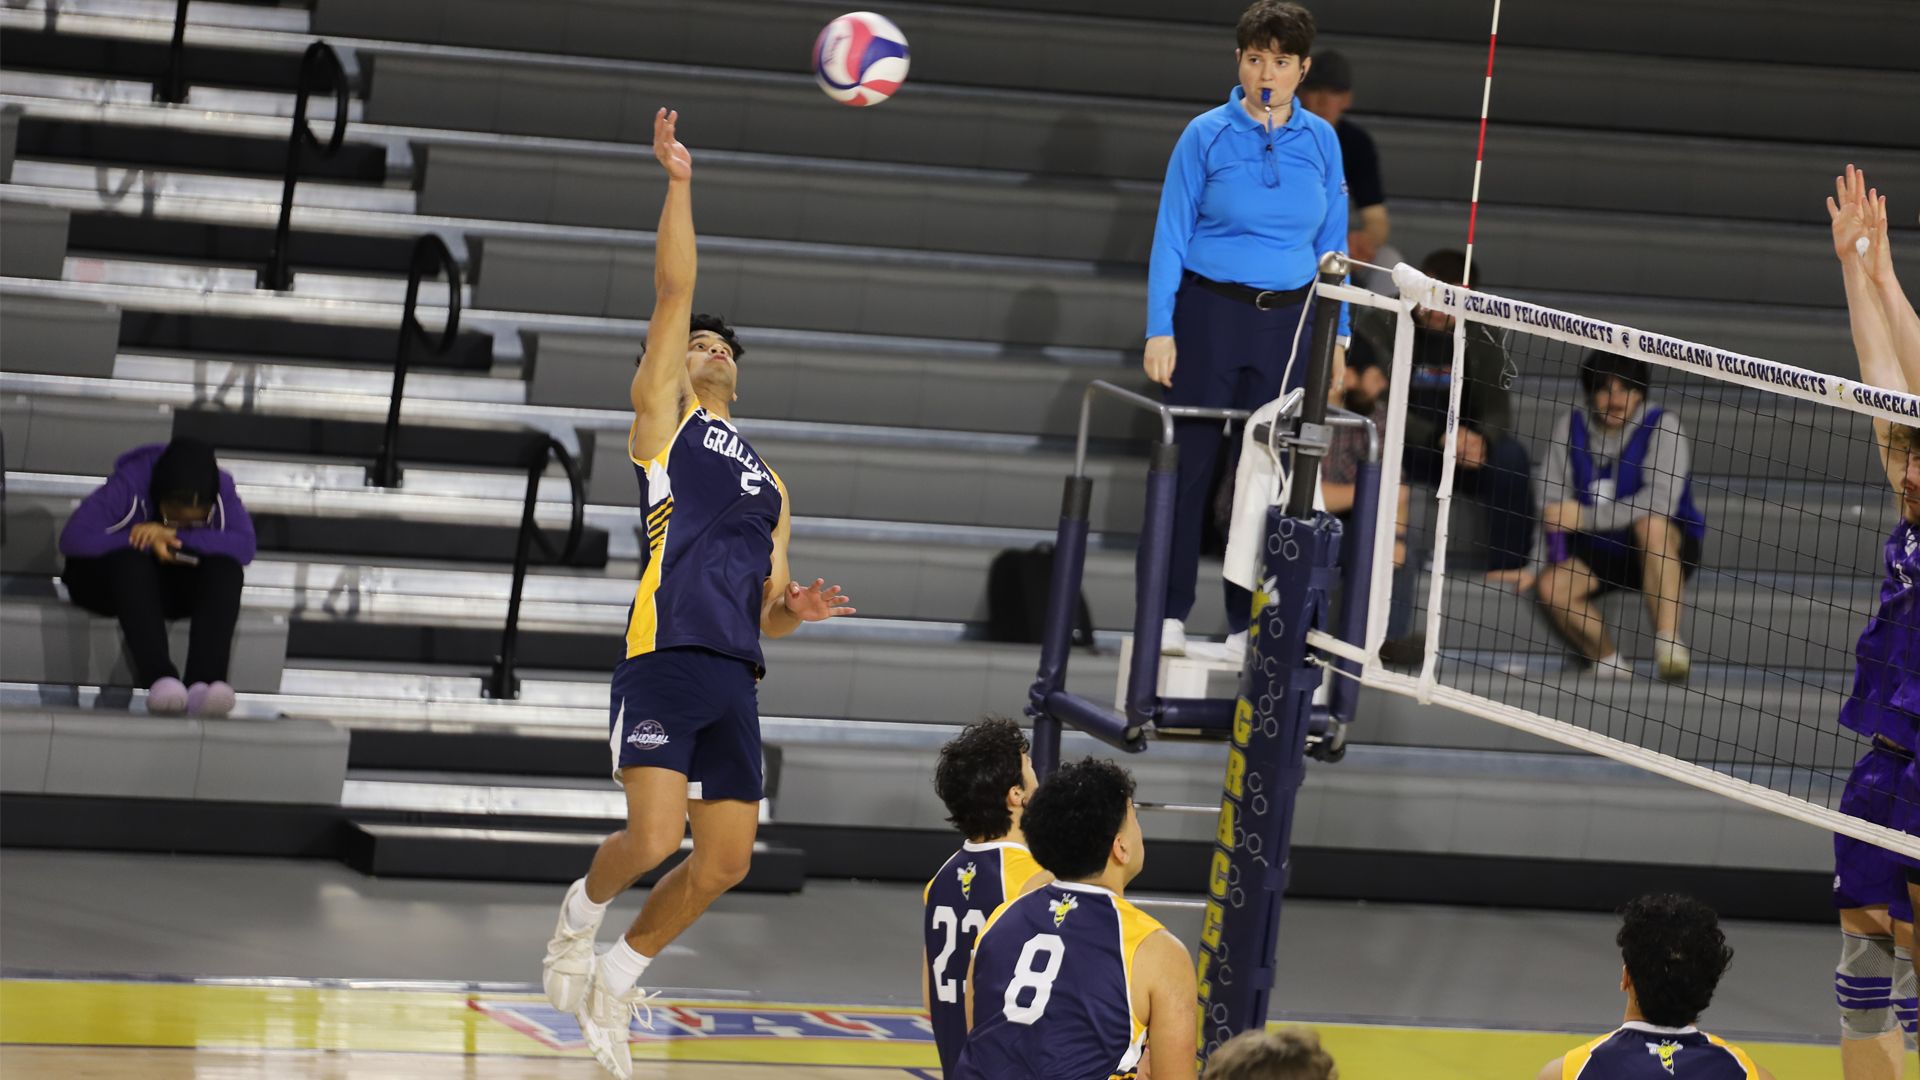 Men’s Volleyball Taken down by UHSP